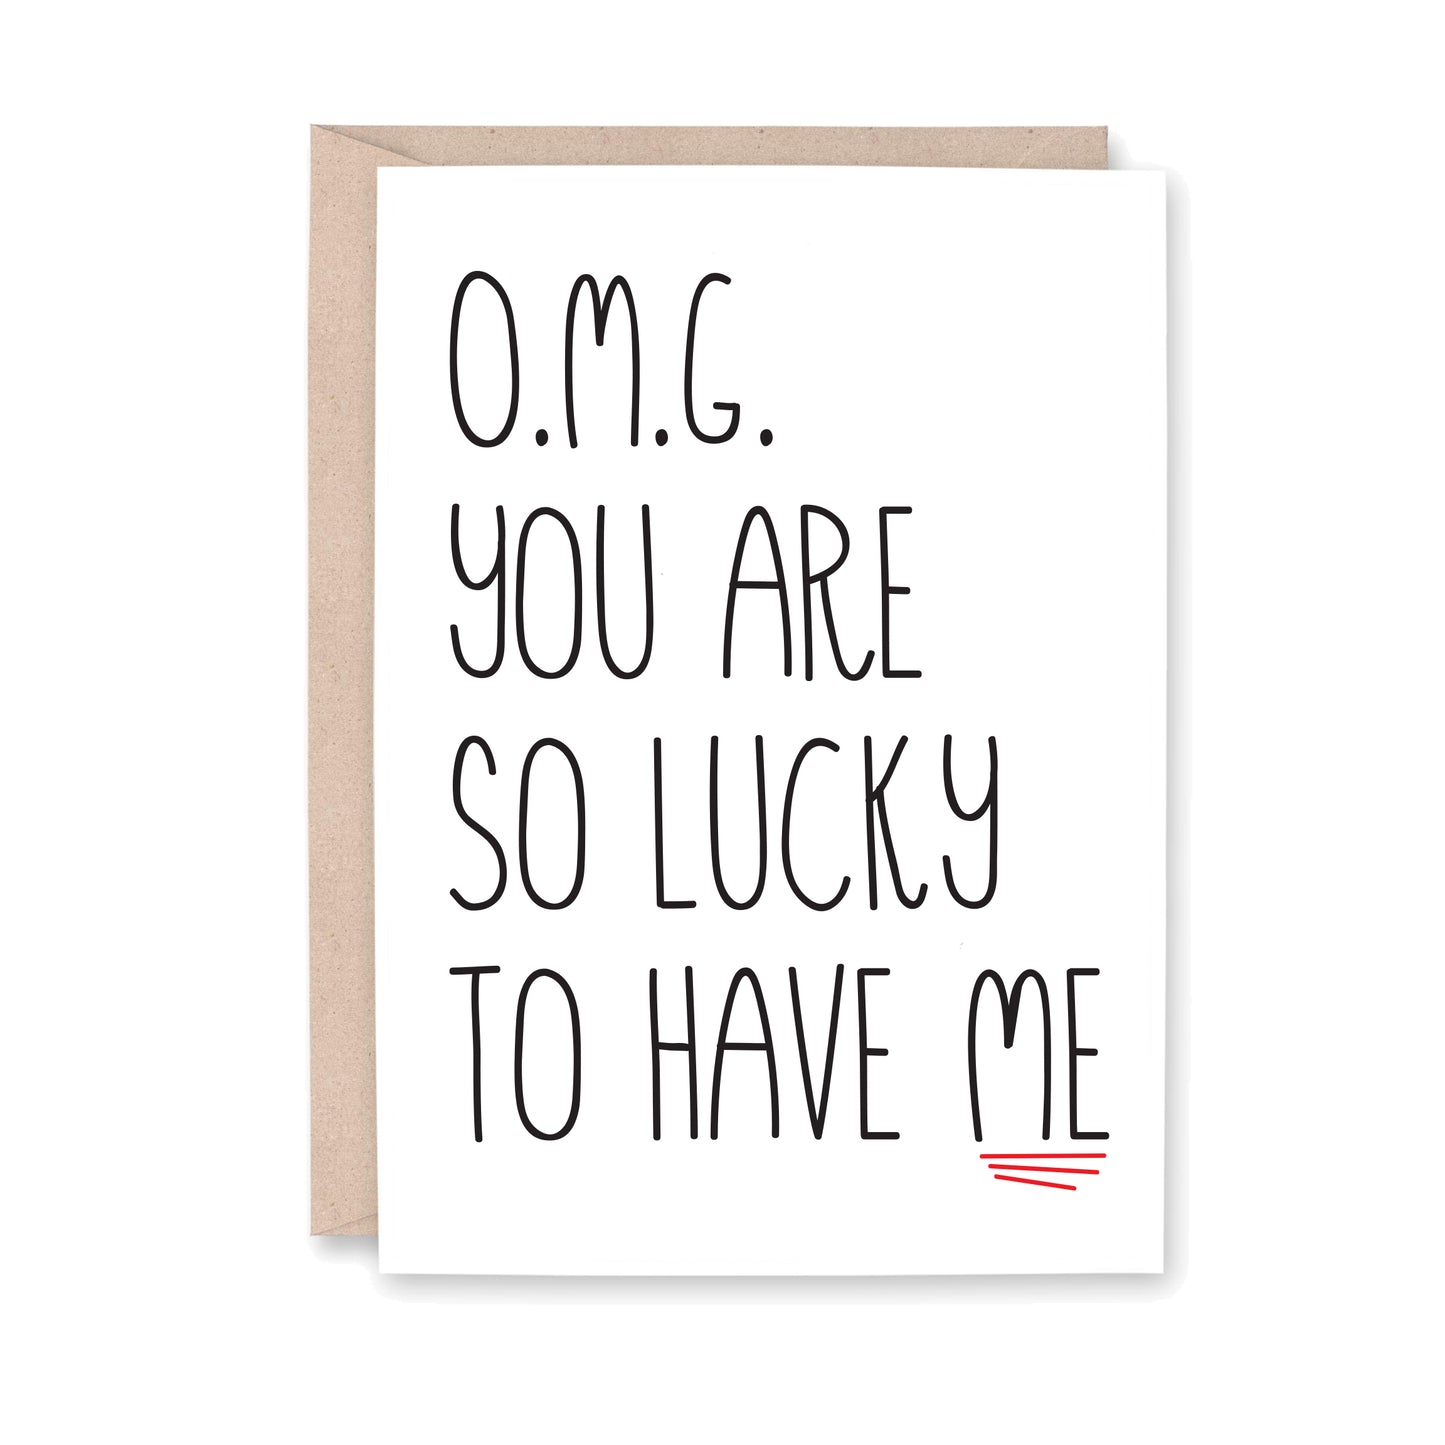 Greeting card reads: OMG you are so lucky to have me